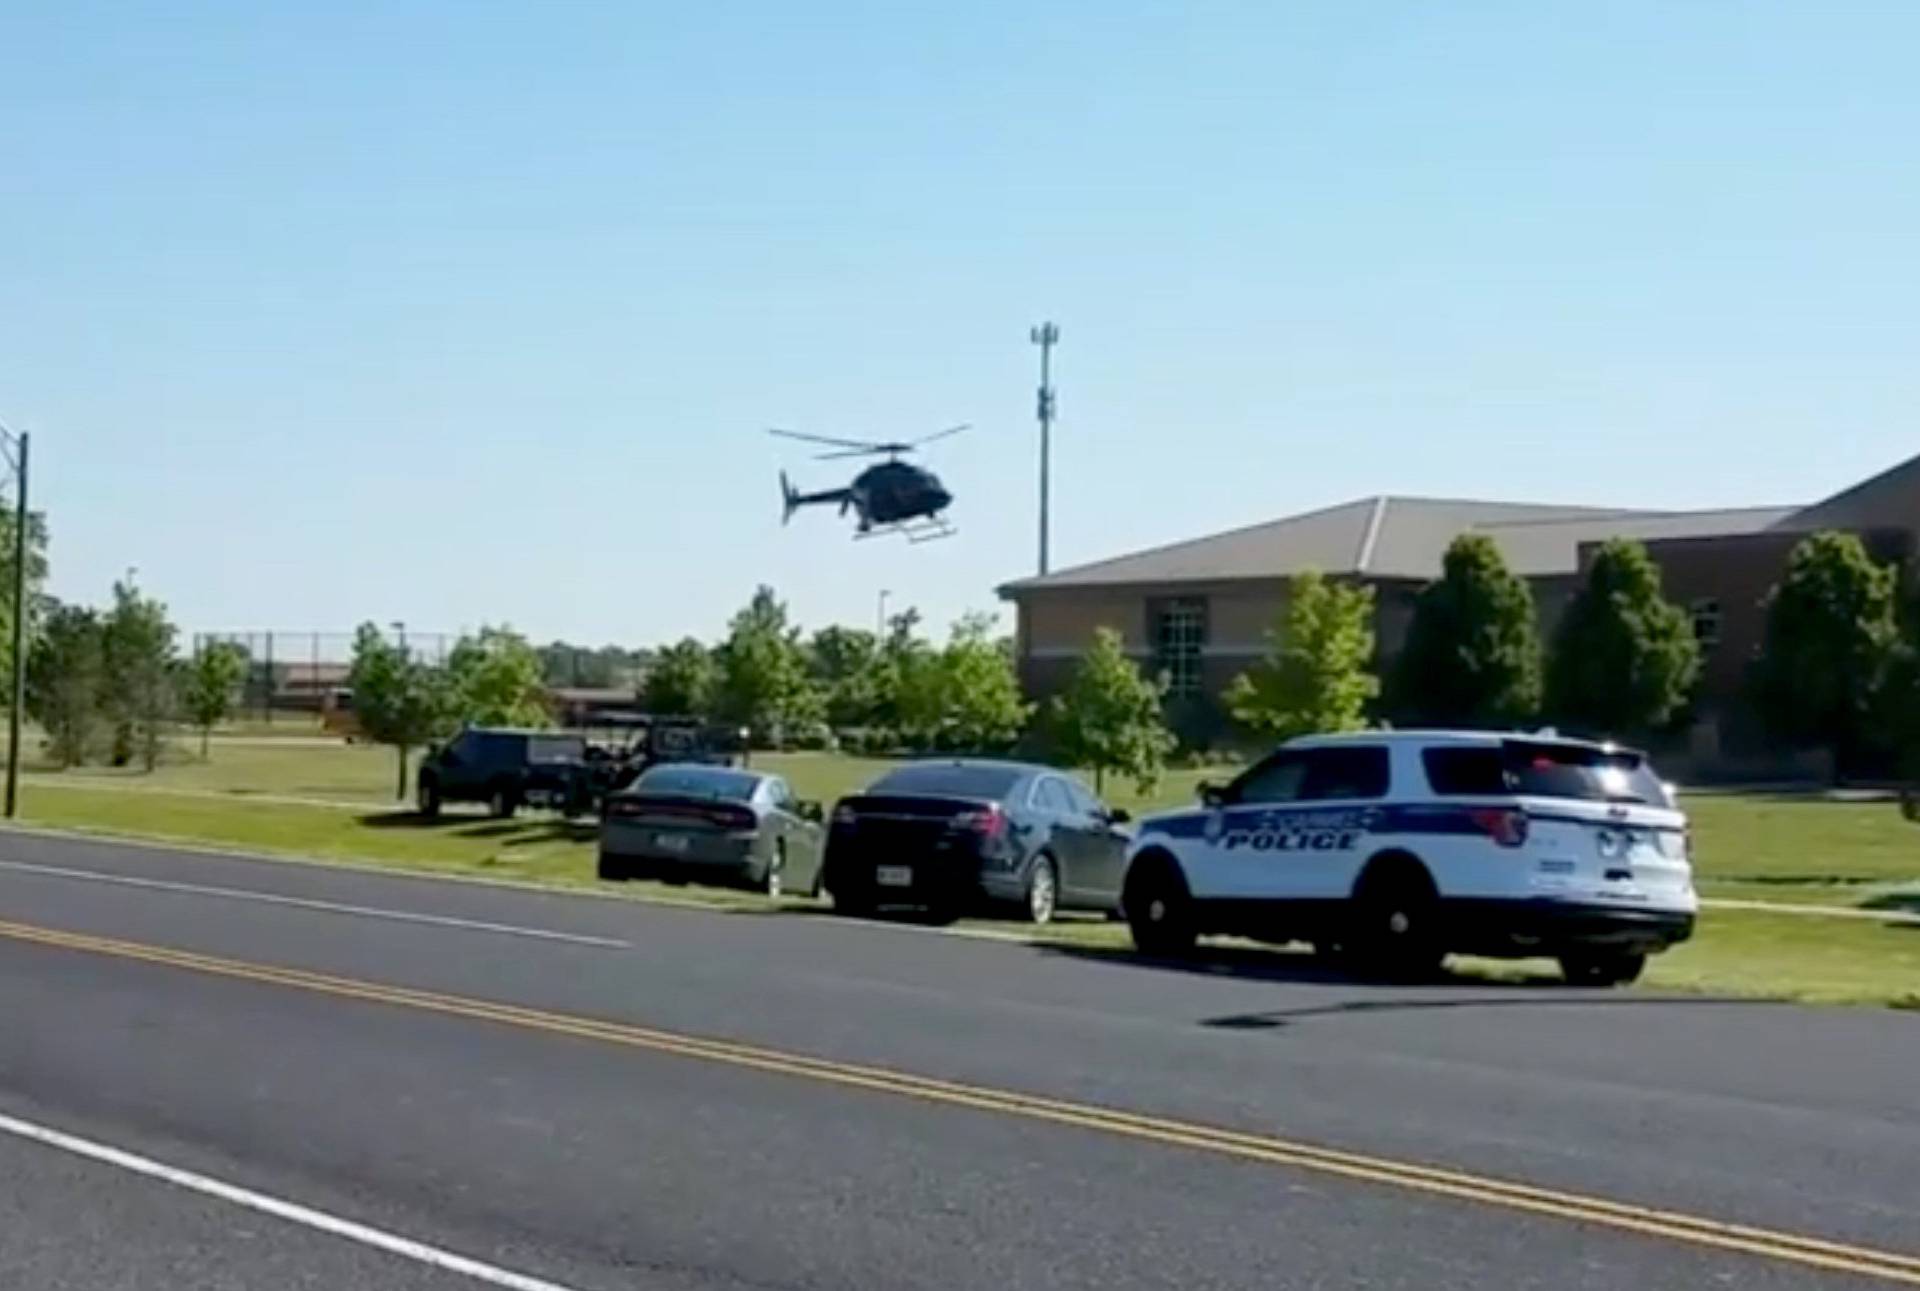 A helicopter lands near Noblesville West Middle School in Noblesville, Indiana